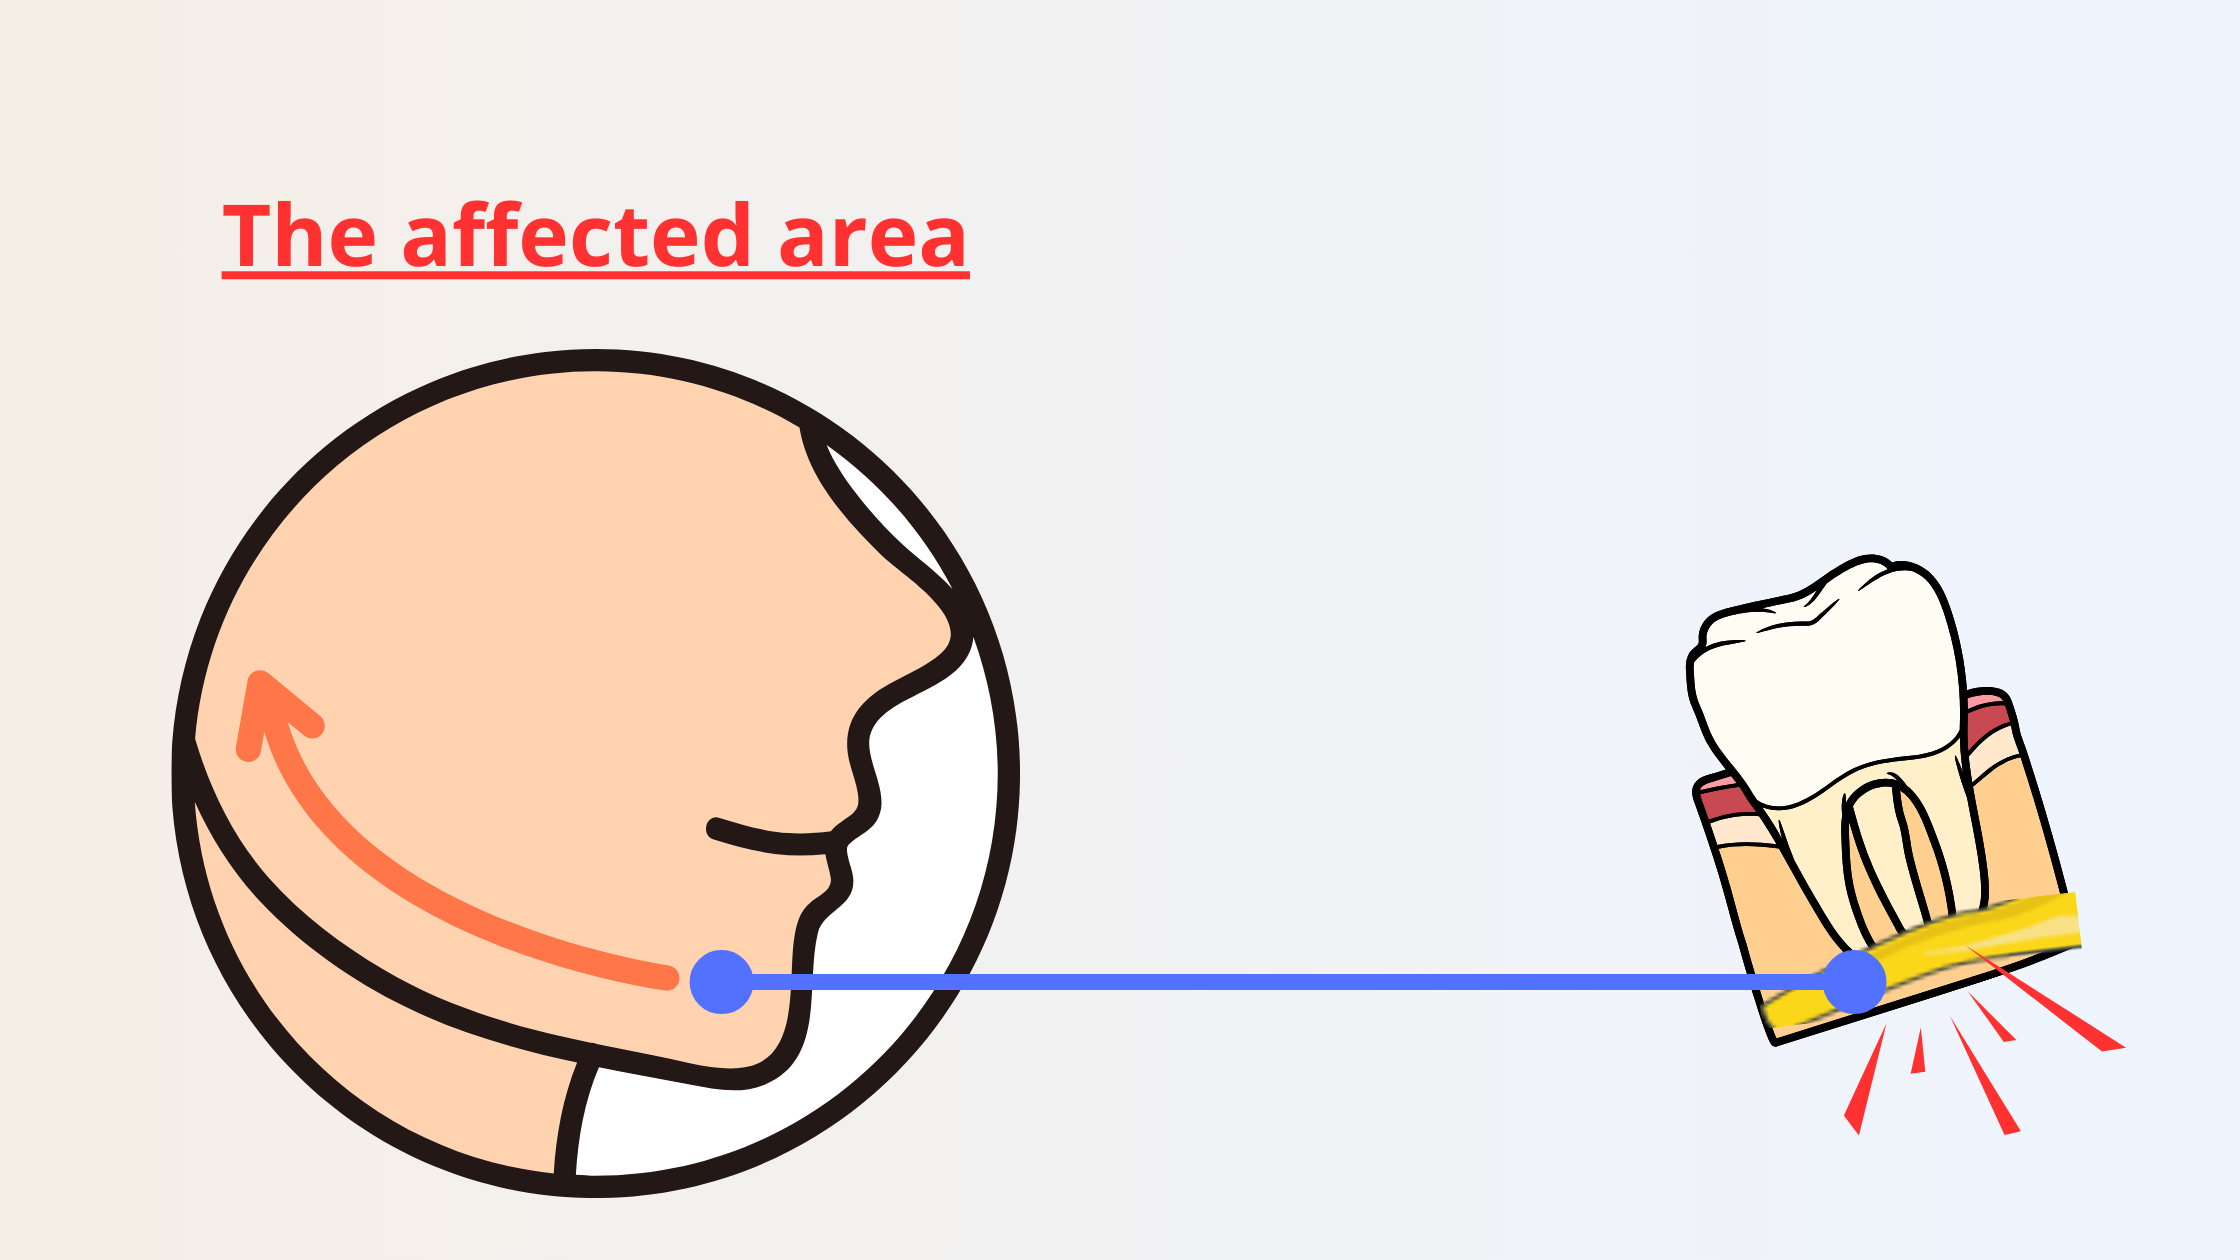 the area affected by the tingling sensation due to an inferior alveolar nerve injury